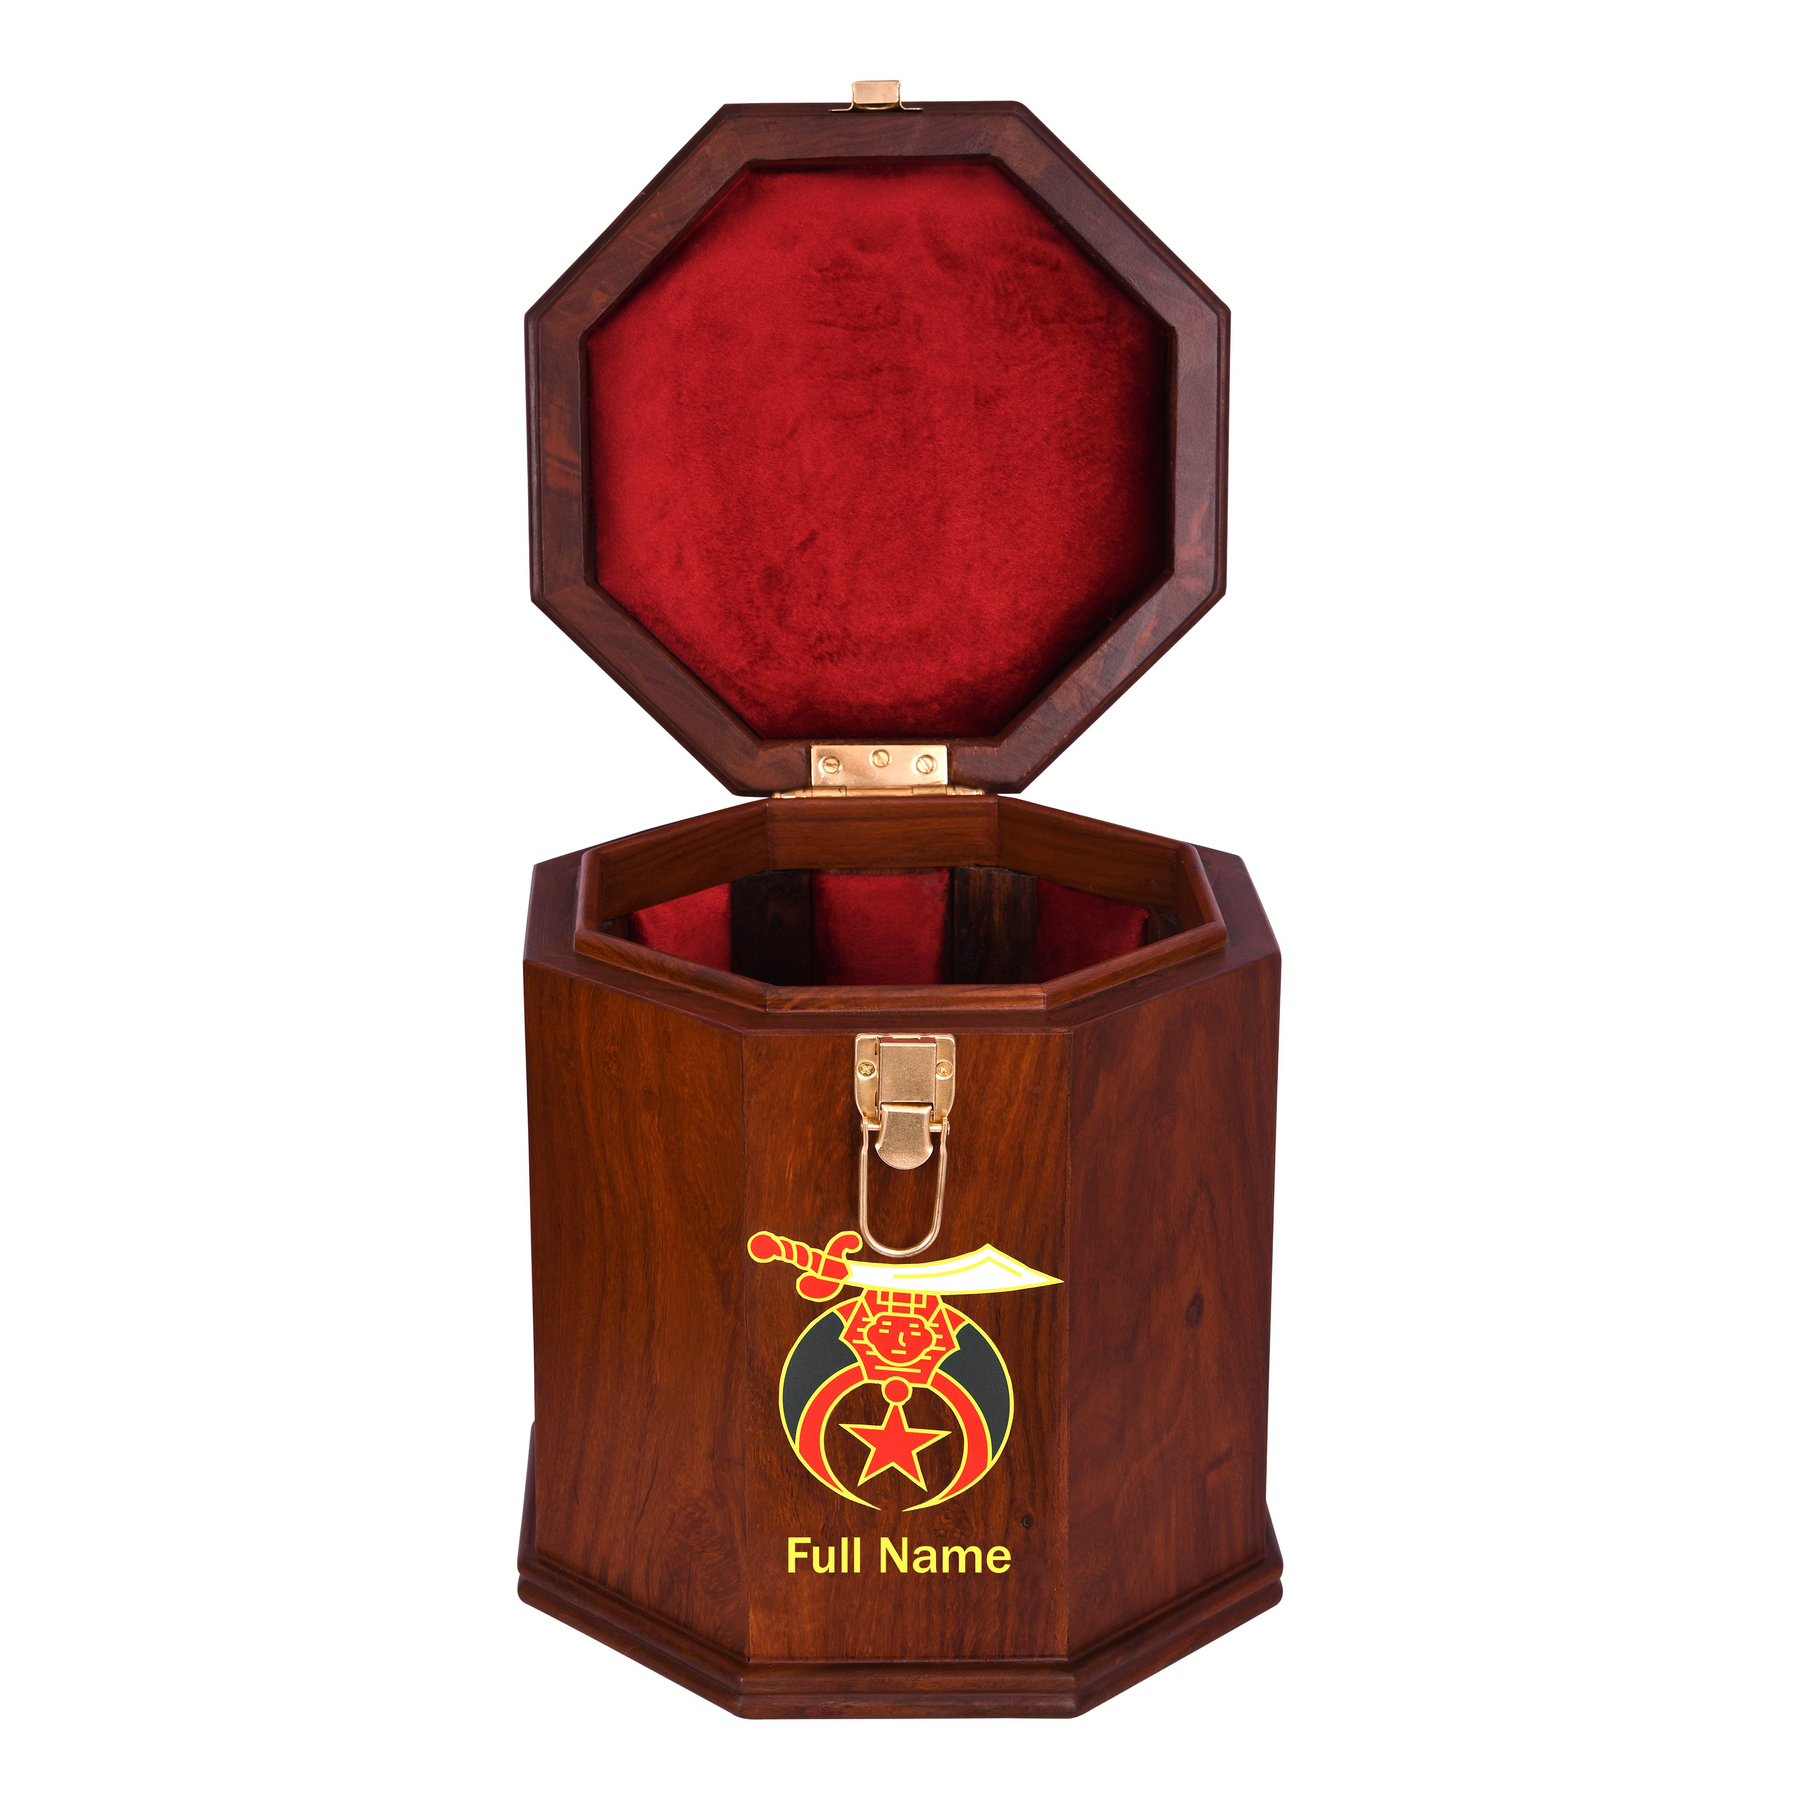 Shriners Fez Case - Personalized Textured Rosewood With Red Velvet Interior - Bricks Masons